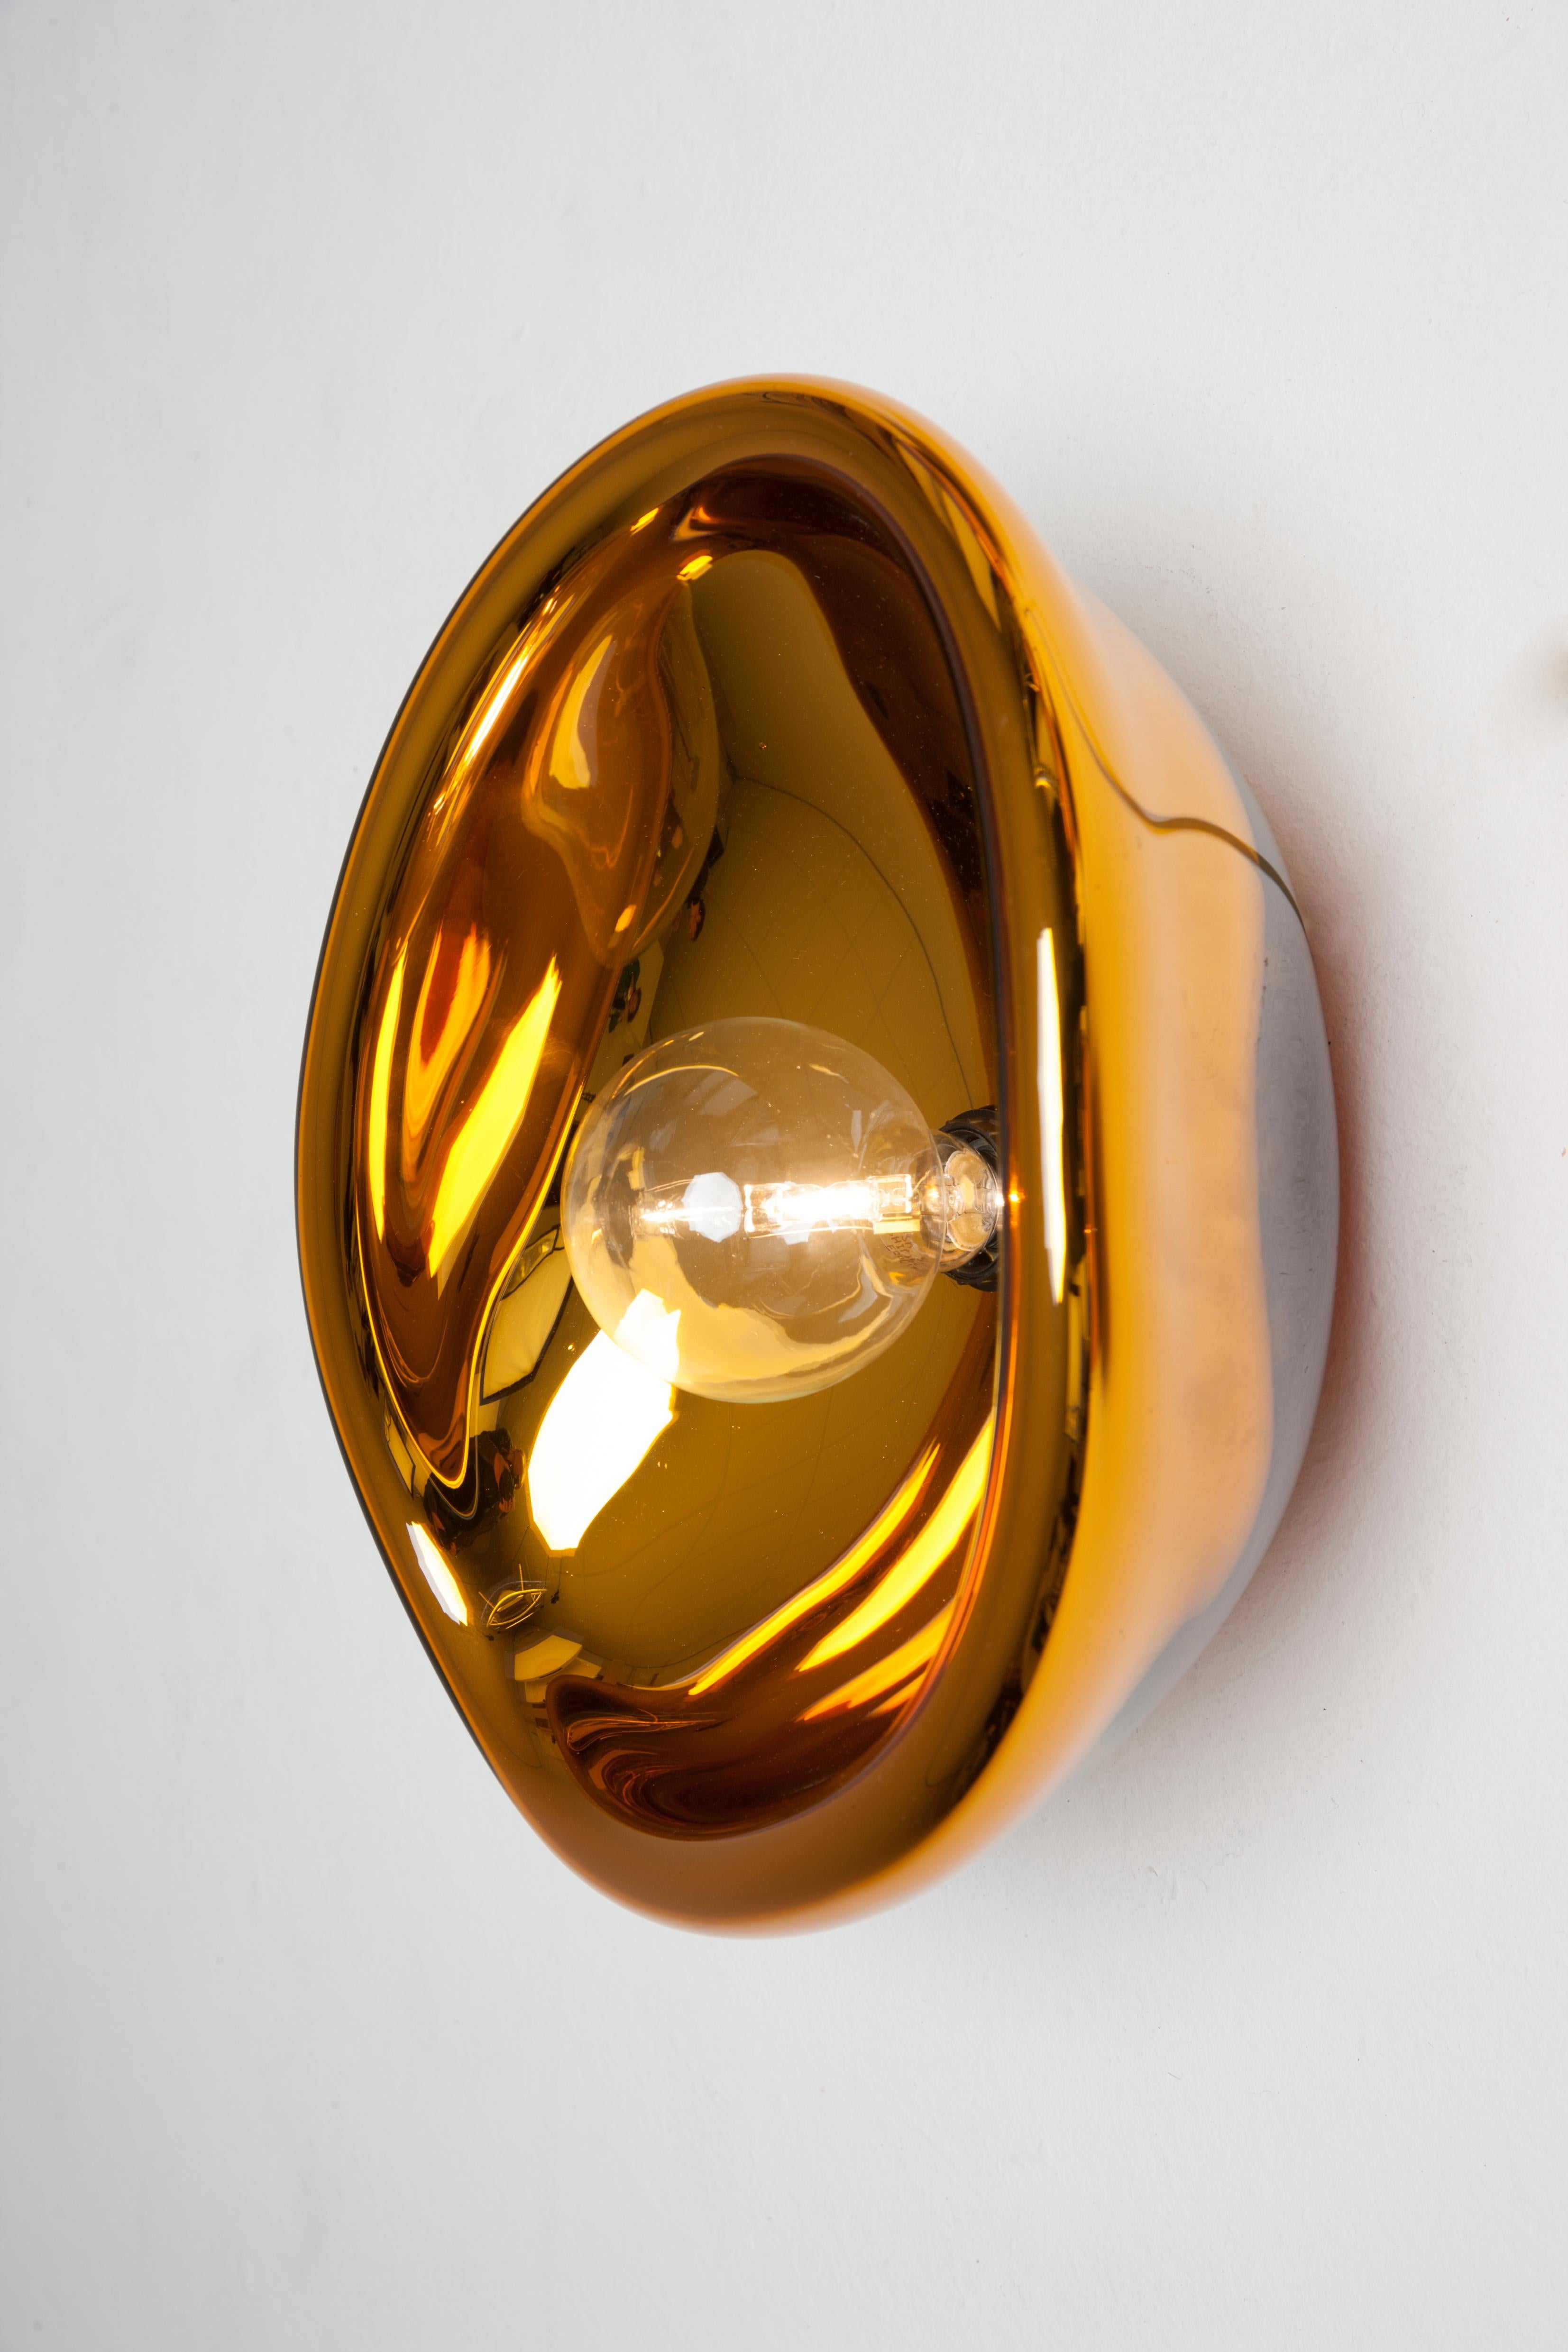 Small Aurum gold glass sconce, Alex de Witte
Unique
Dimensions: D 20 x H 30 cm
Materials: Mouth Blown Glass
It can be purchased as an ensemble or individual, in different dimensions and colors.

Aurum shows how Alex de Wite is able to convey